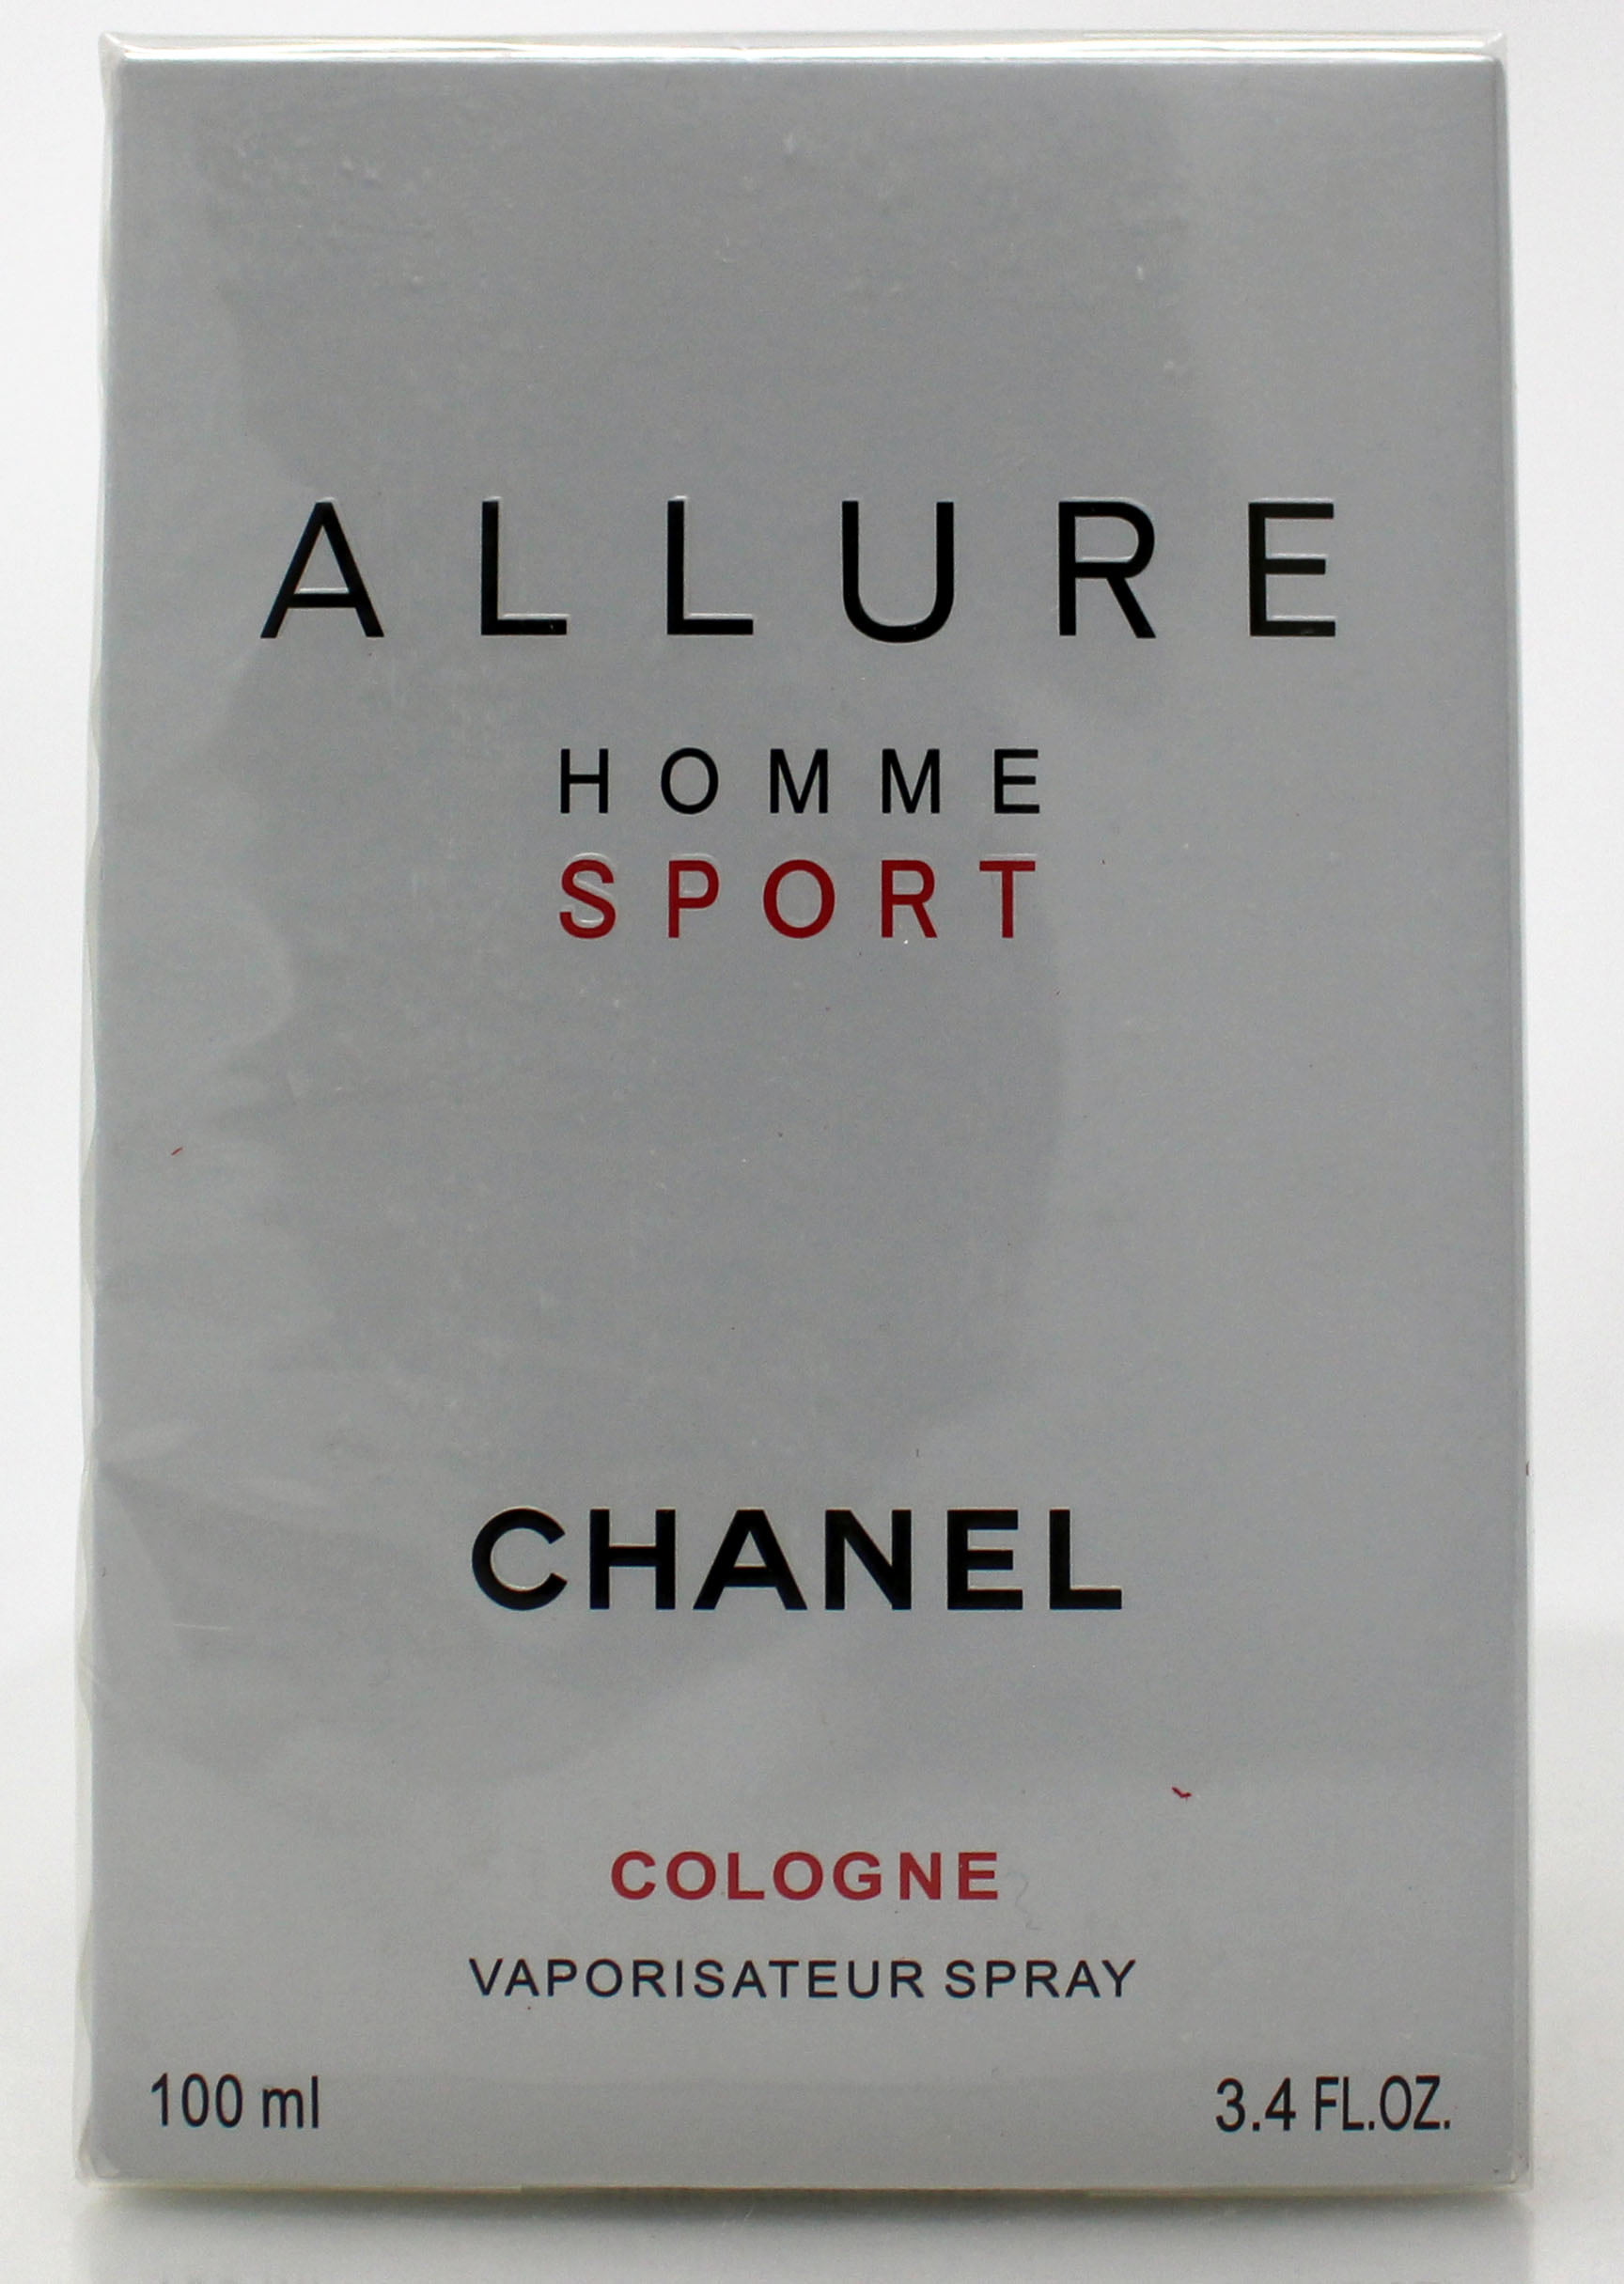 Allure homme cologne. Chanel Allure Sport Cologne 50ml. Chanel homme Sport Cologne. Chanel Allure homme Sport Cologne 3*20. Chanel Allure homme Sport Cologne 3 20 ml.